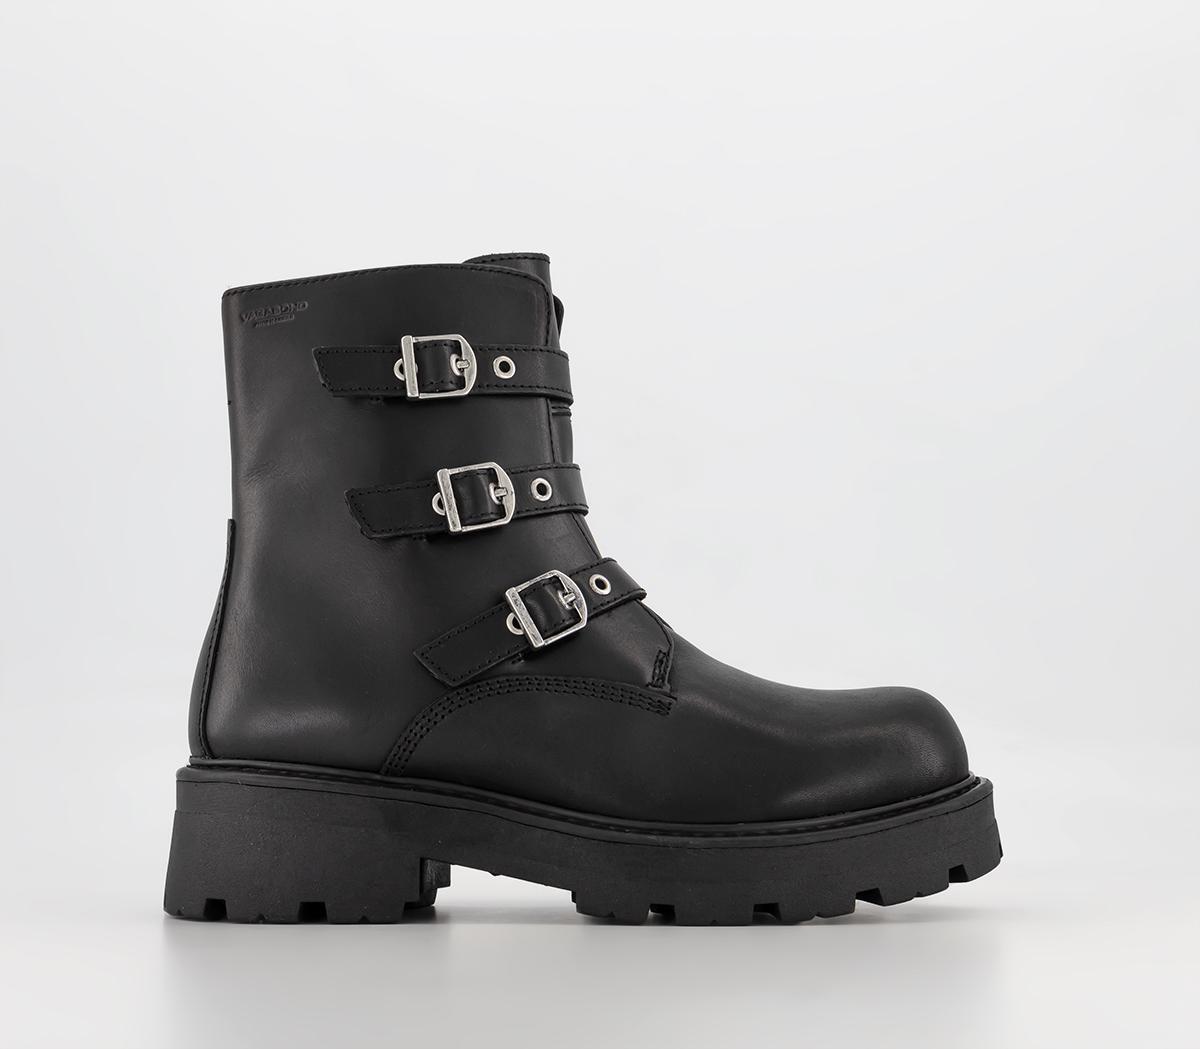 Vagabond Shoemakers Cosmo 2.0 Buckle Boots - Boots